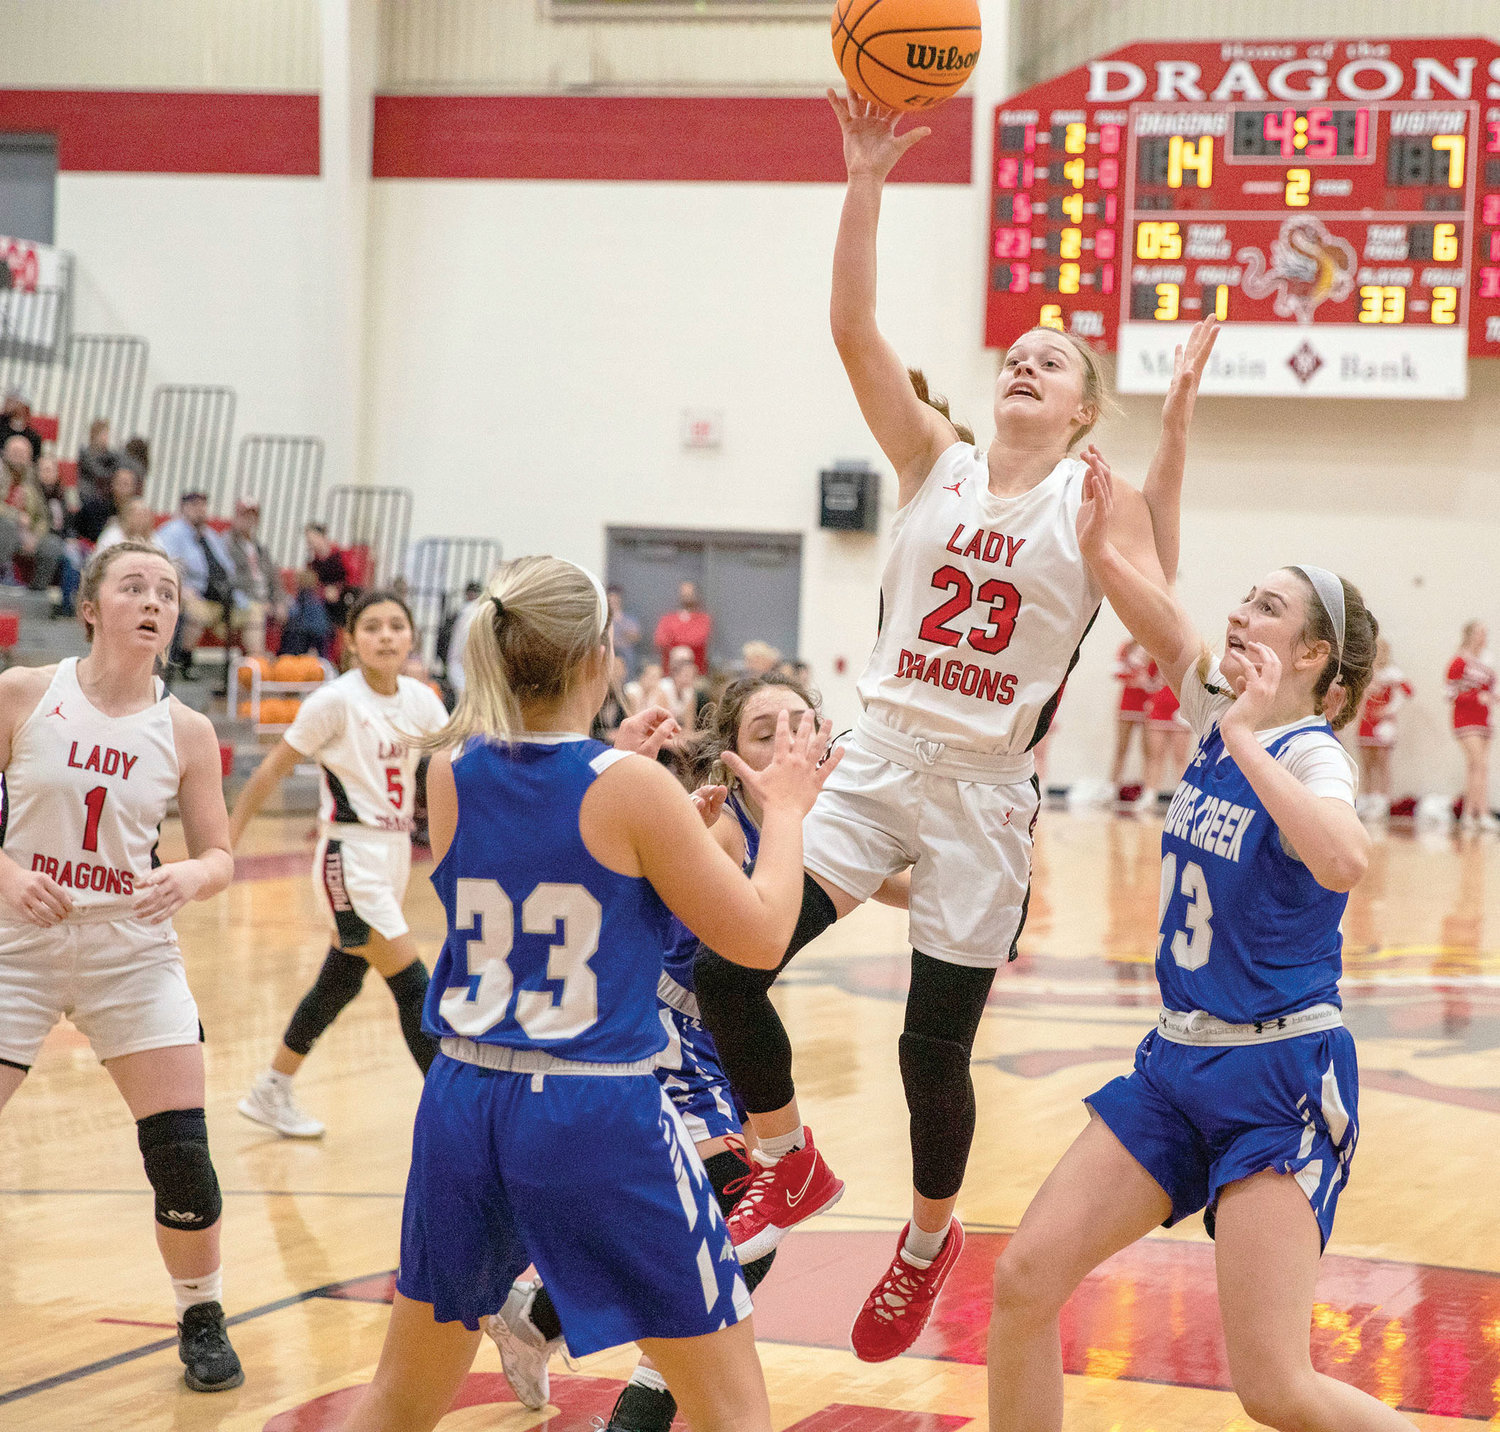 Purcell freshman Hadleigh Harp shoots a ball in the lane against Bridge Creek on January 4. Harp scored four points in the 51-34 Dragon win.